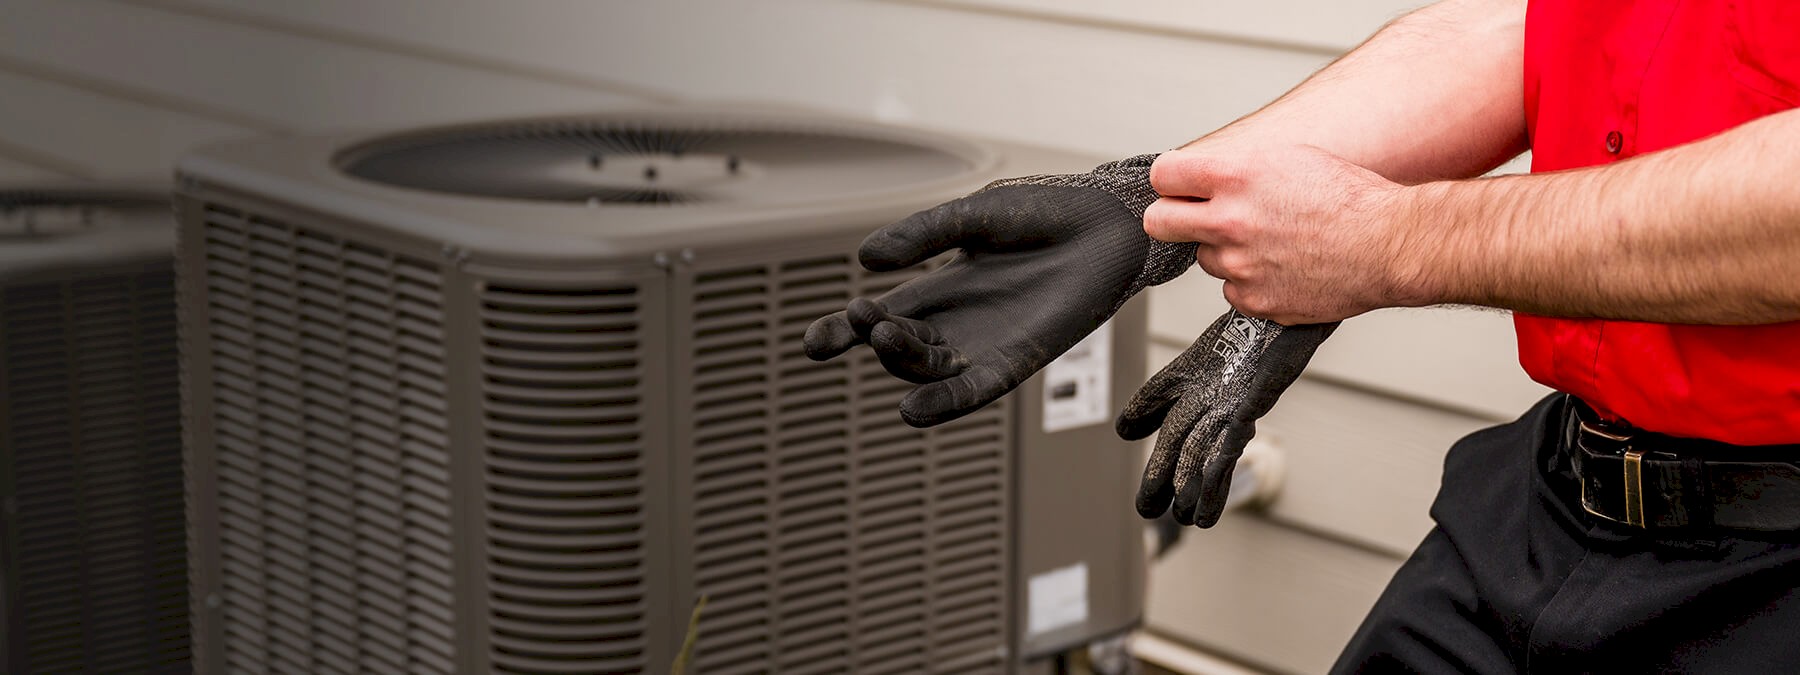 We offer repair, maintenance & installation of air conditioners in Central Ohio